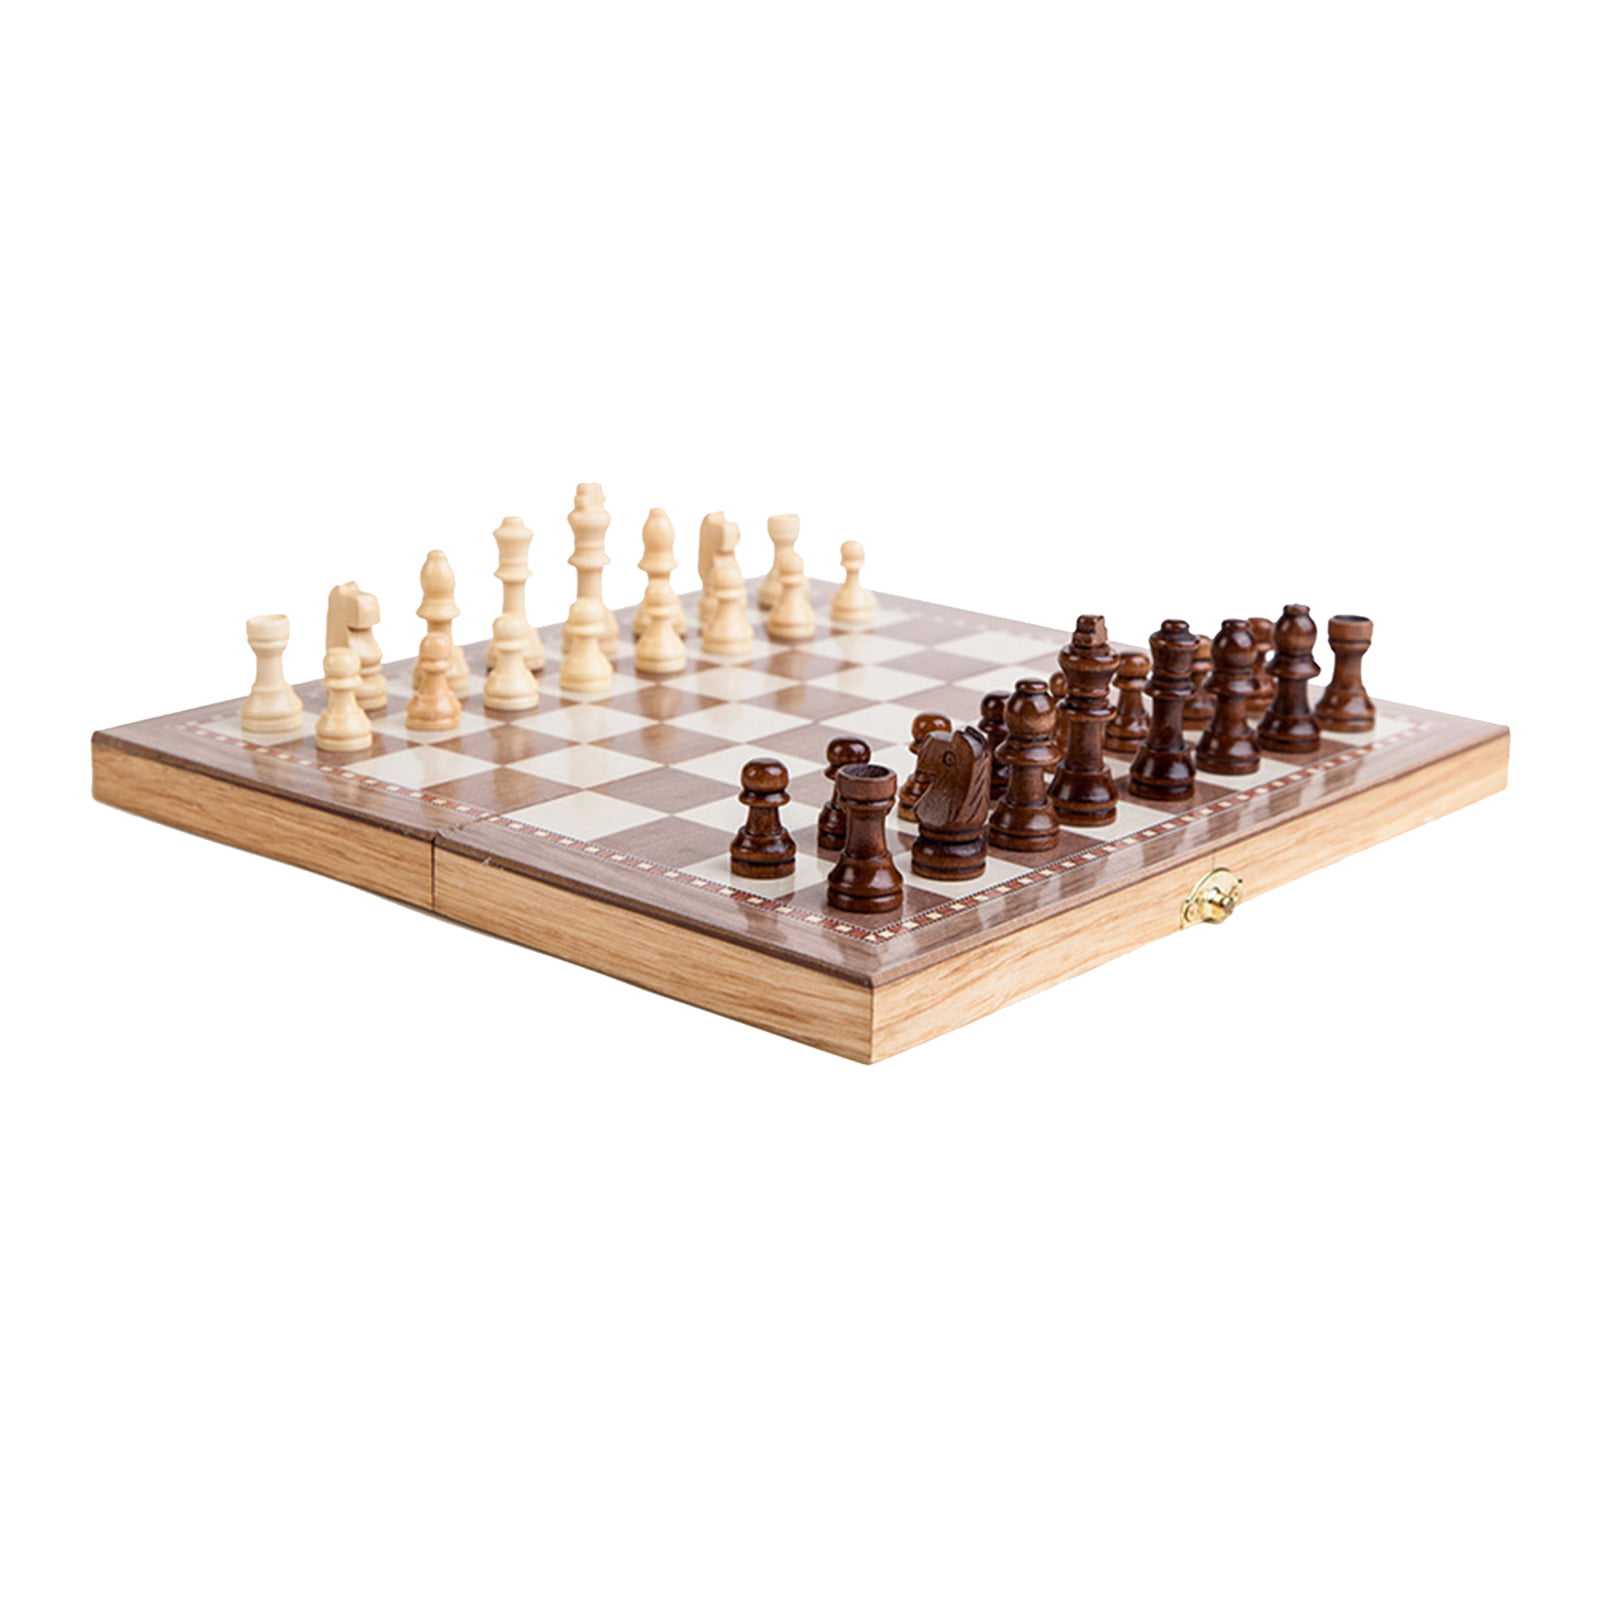 YENIGUN WOODEN CHESS SET WITH CHECKERED DESIGN AND PIECES INCLUDED 